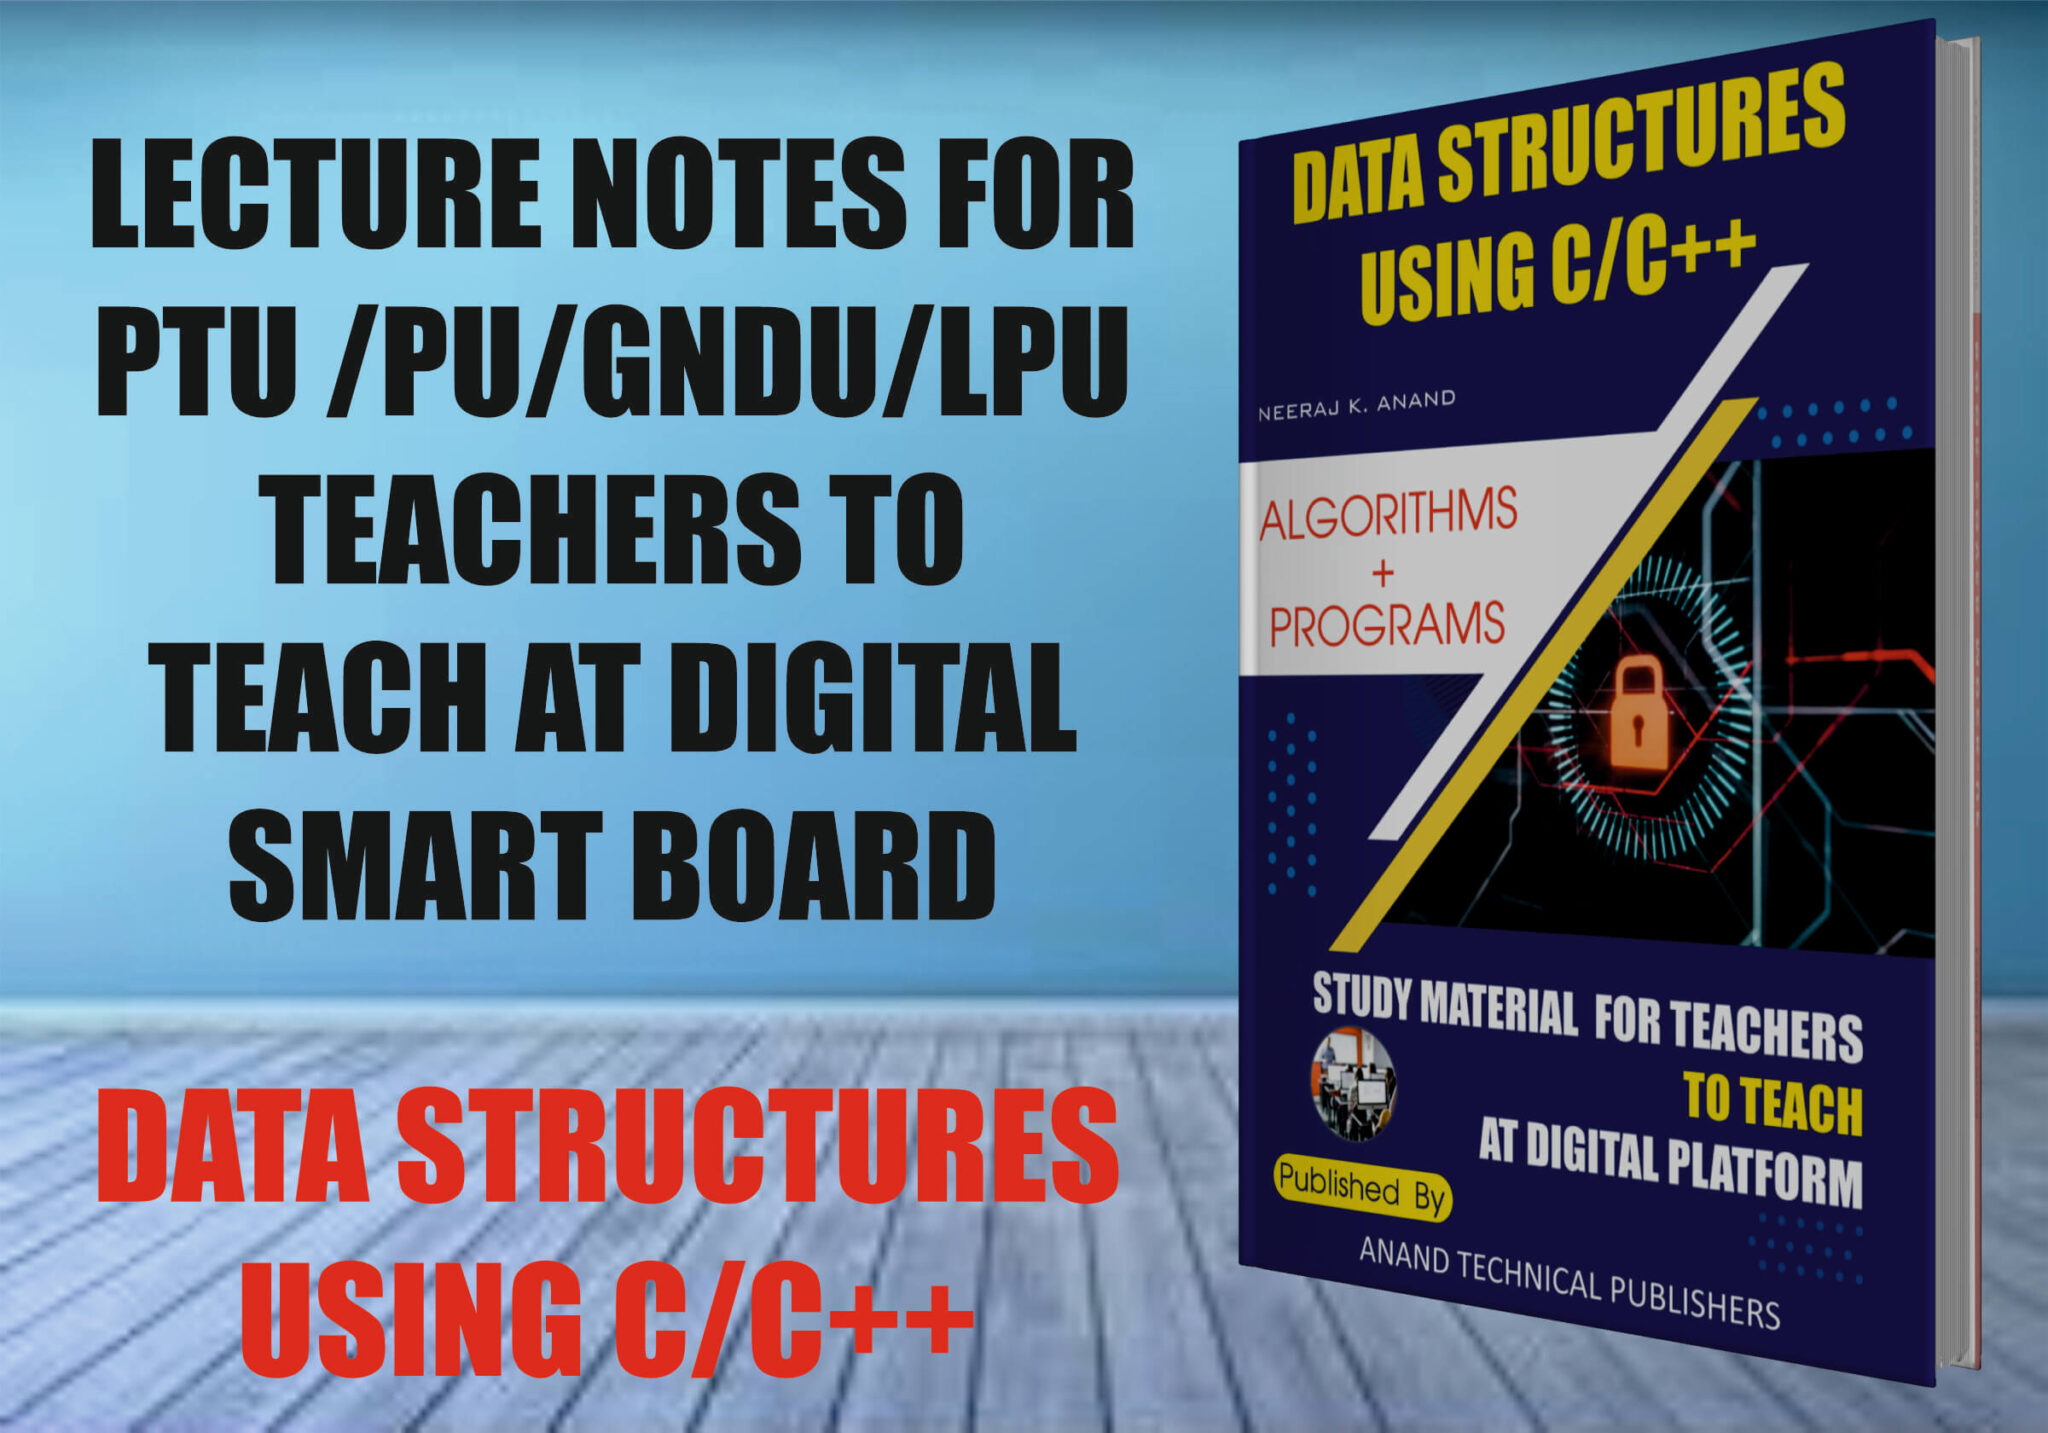 Data Structure Lecture Notes EBooks Study Material Download pdf for BCA BSc IT BSc Computer Science|Anand Technical Publishers|Neeraj K Anand-PARAM ANAND